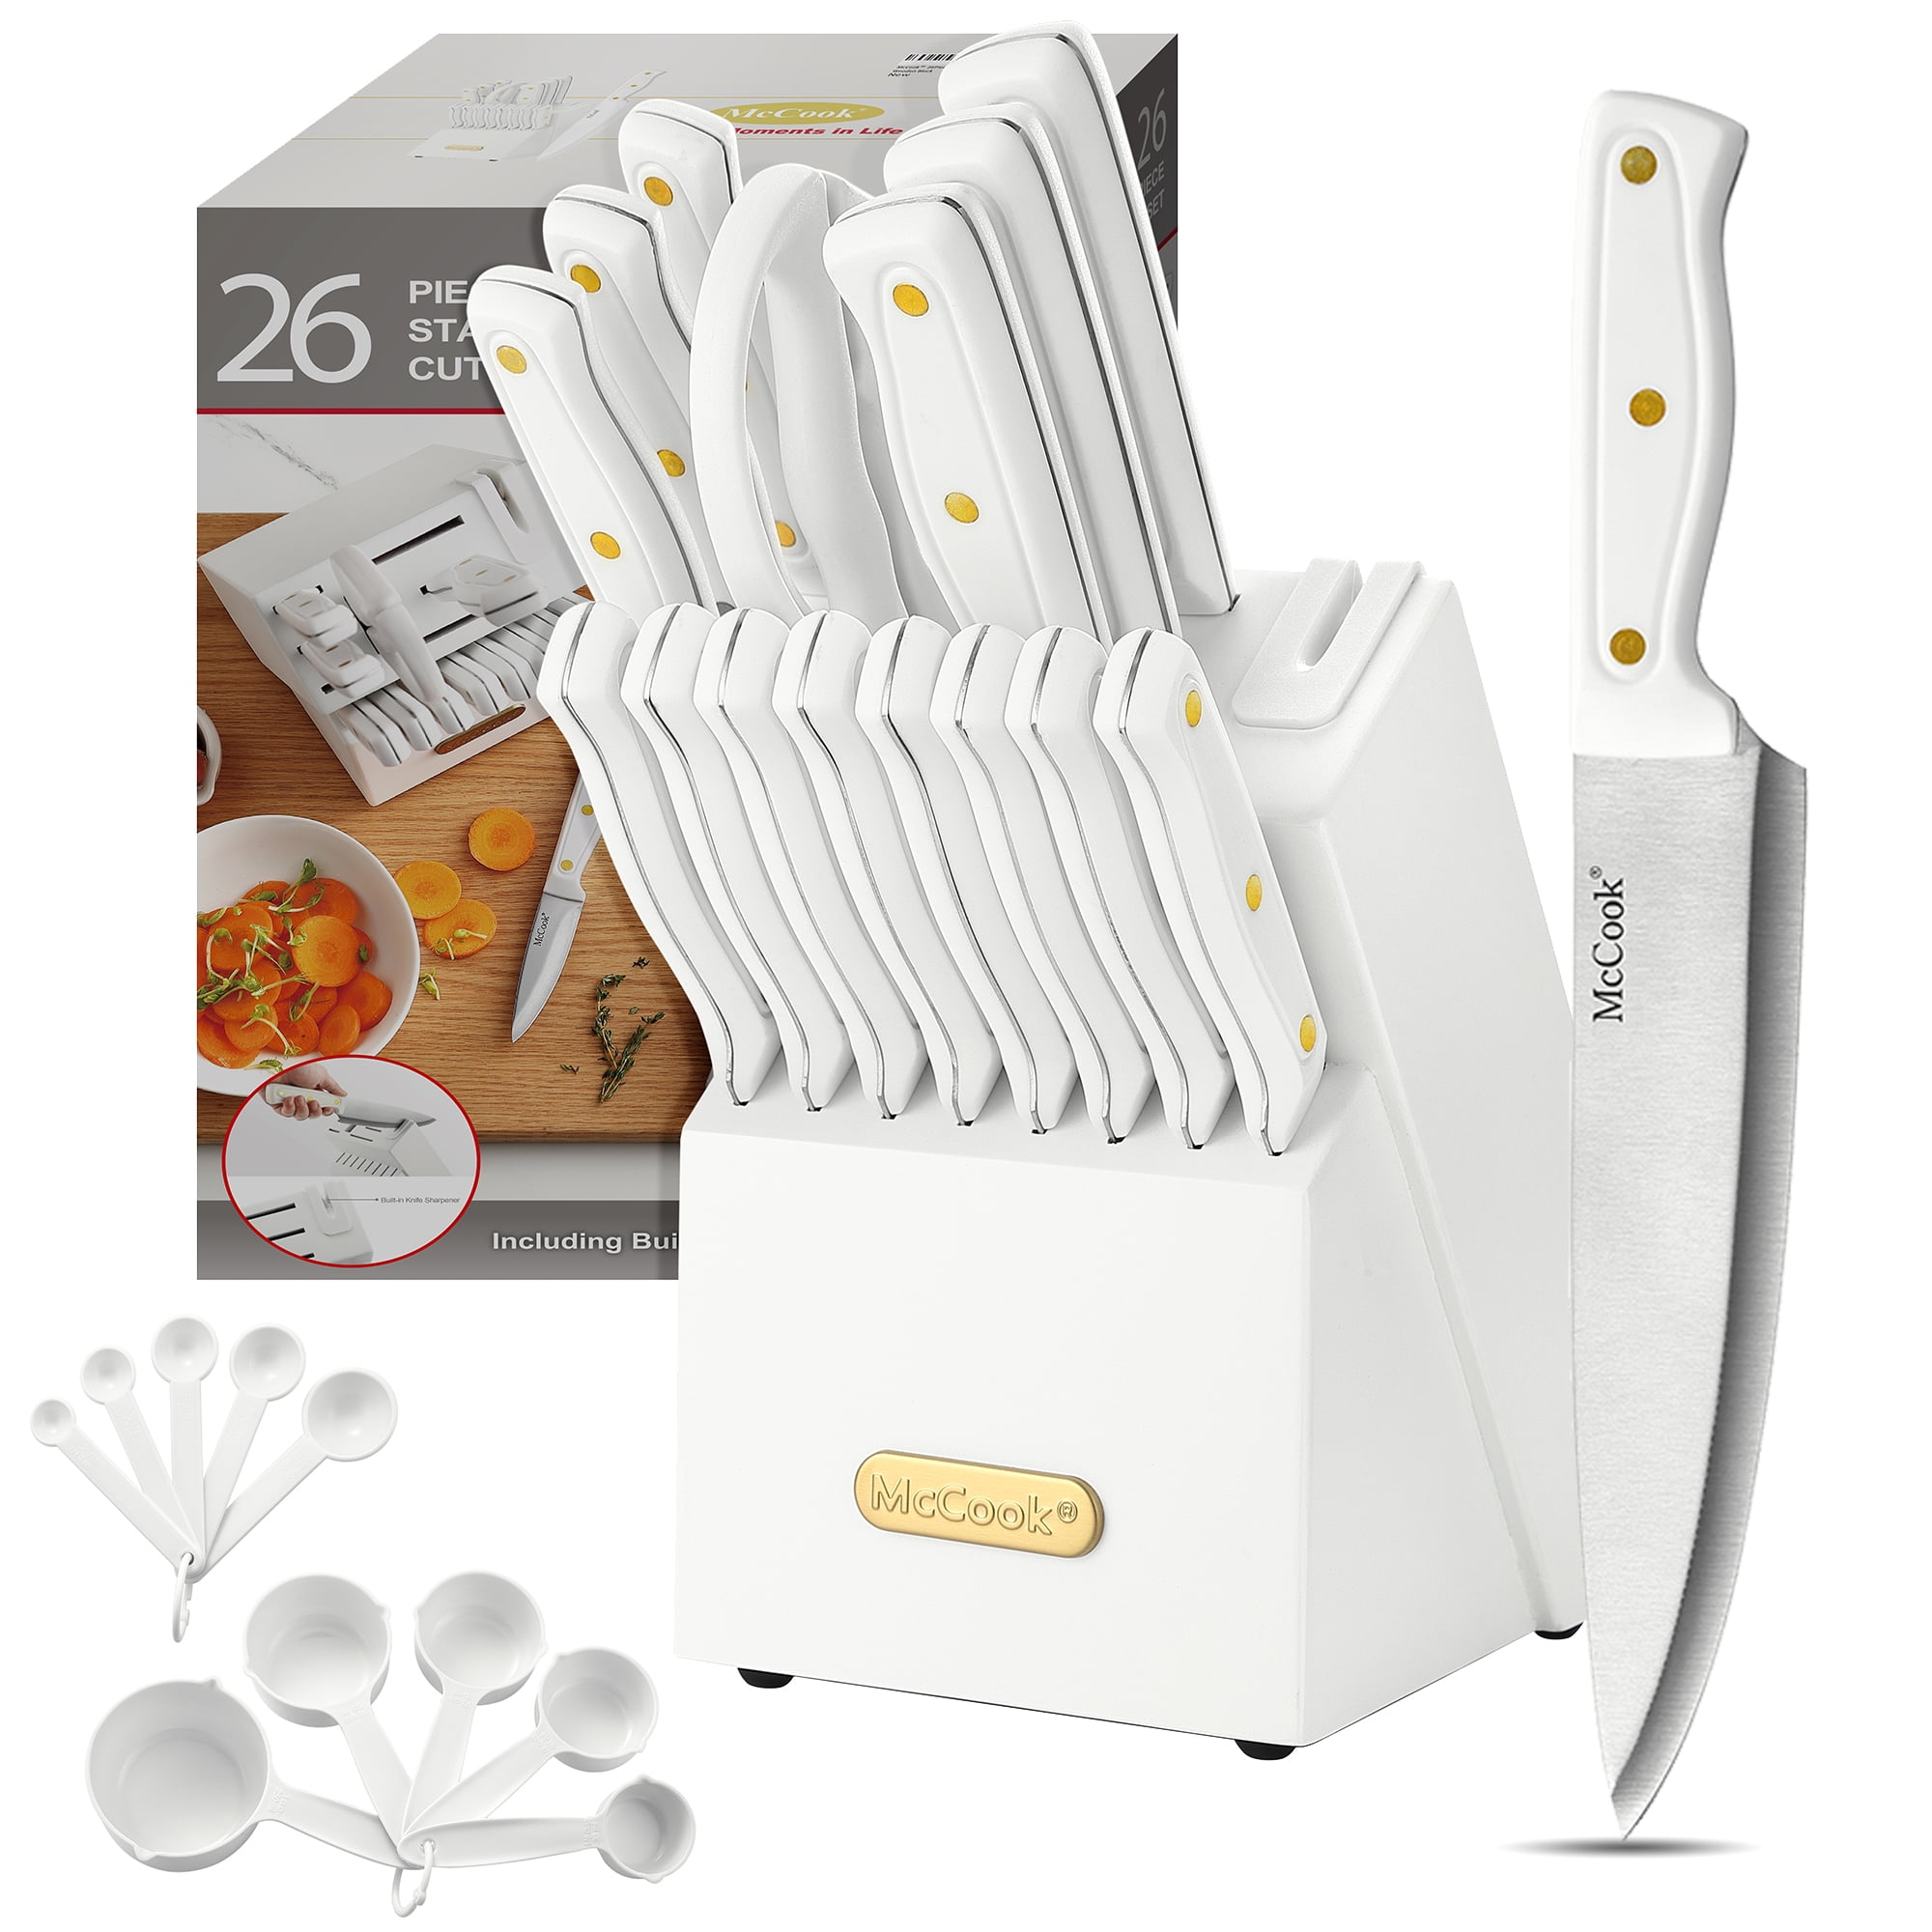 Dexter-Russell V3CP V-LO 3 Piece Cutlery Set – THE FIRST